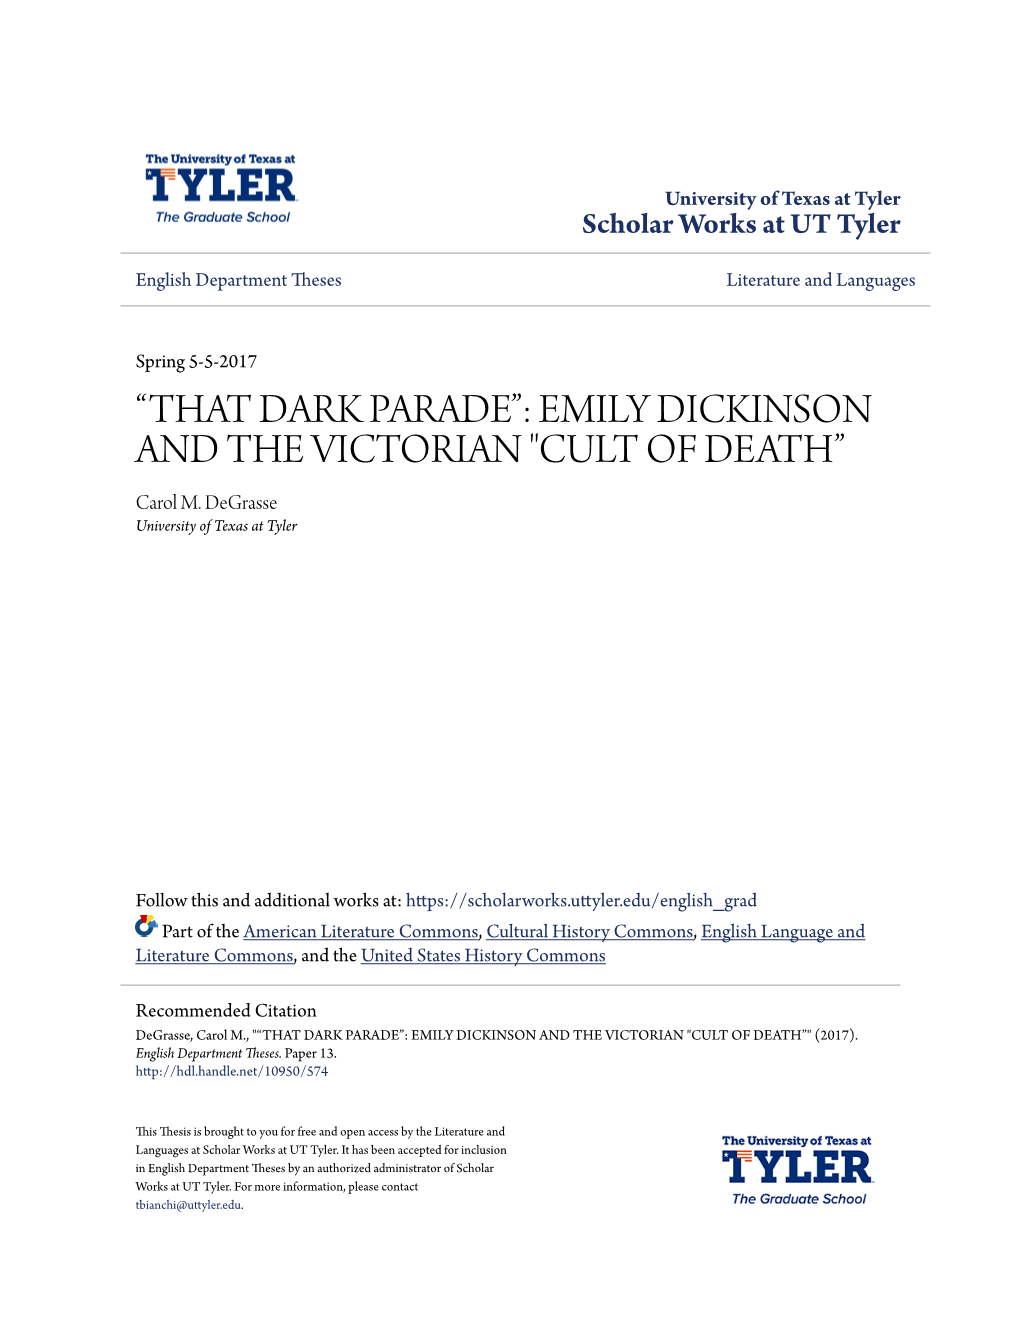 EMILY DICKINSON and the VICTORIAN "CULT of DEATH” Carol M